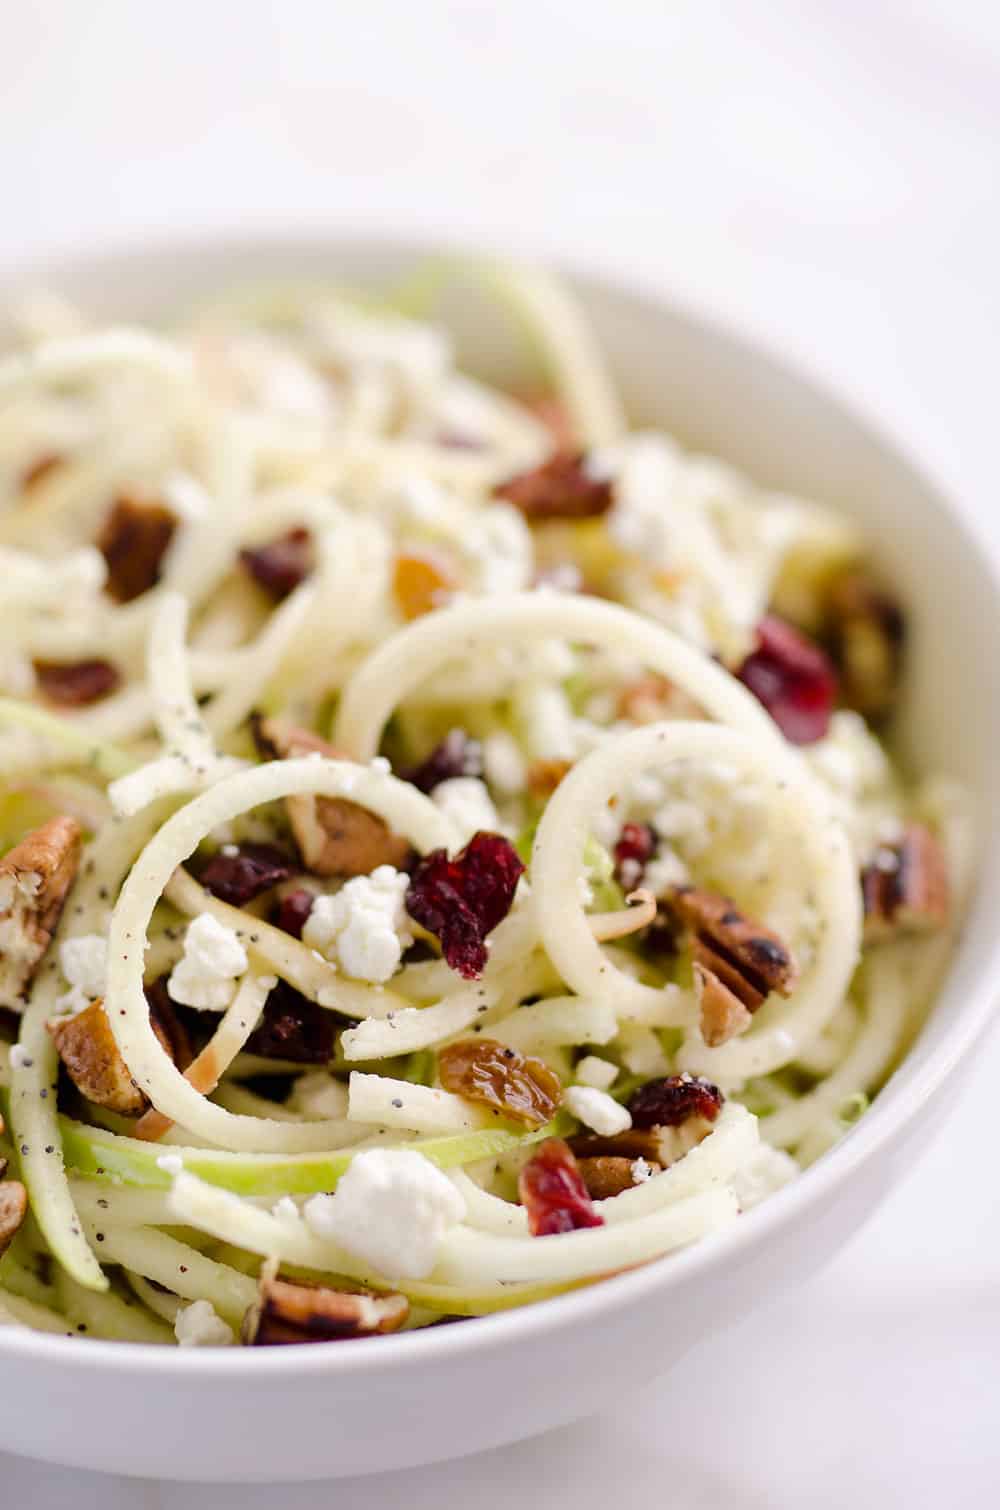 Spiralized Apple Cranberry Salad is an easy and healthy recipe made with crunchy apples, cranberries, pecans and goat cheese all tossed in a light Citrus Poppy Seed Dressing. This salad makes for a a deliciously easy side dish or vegetarian entree you will love!